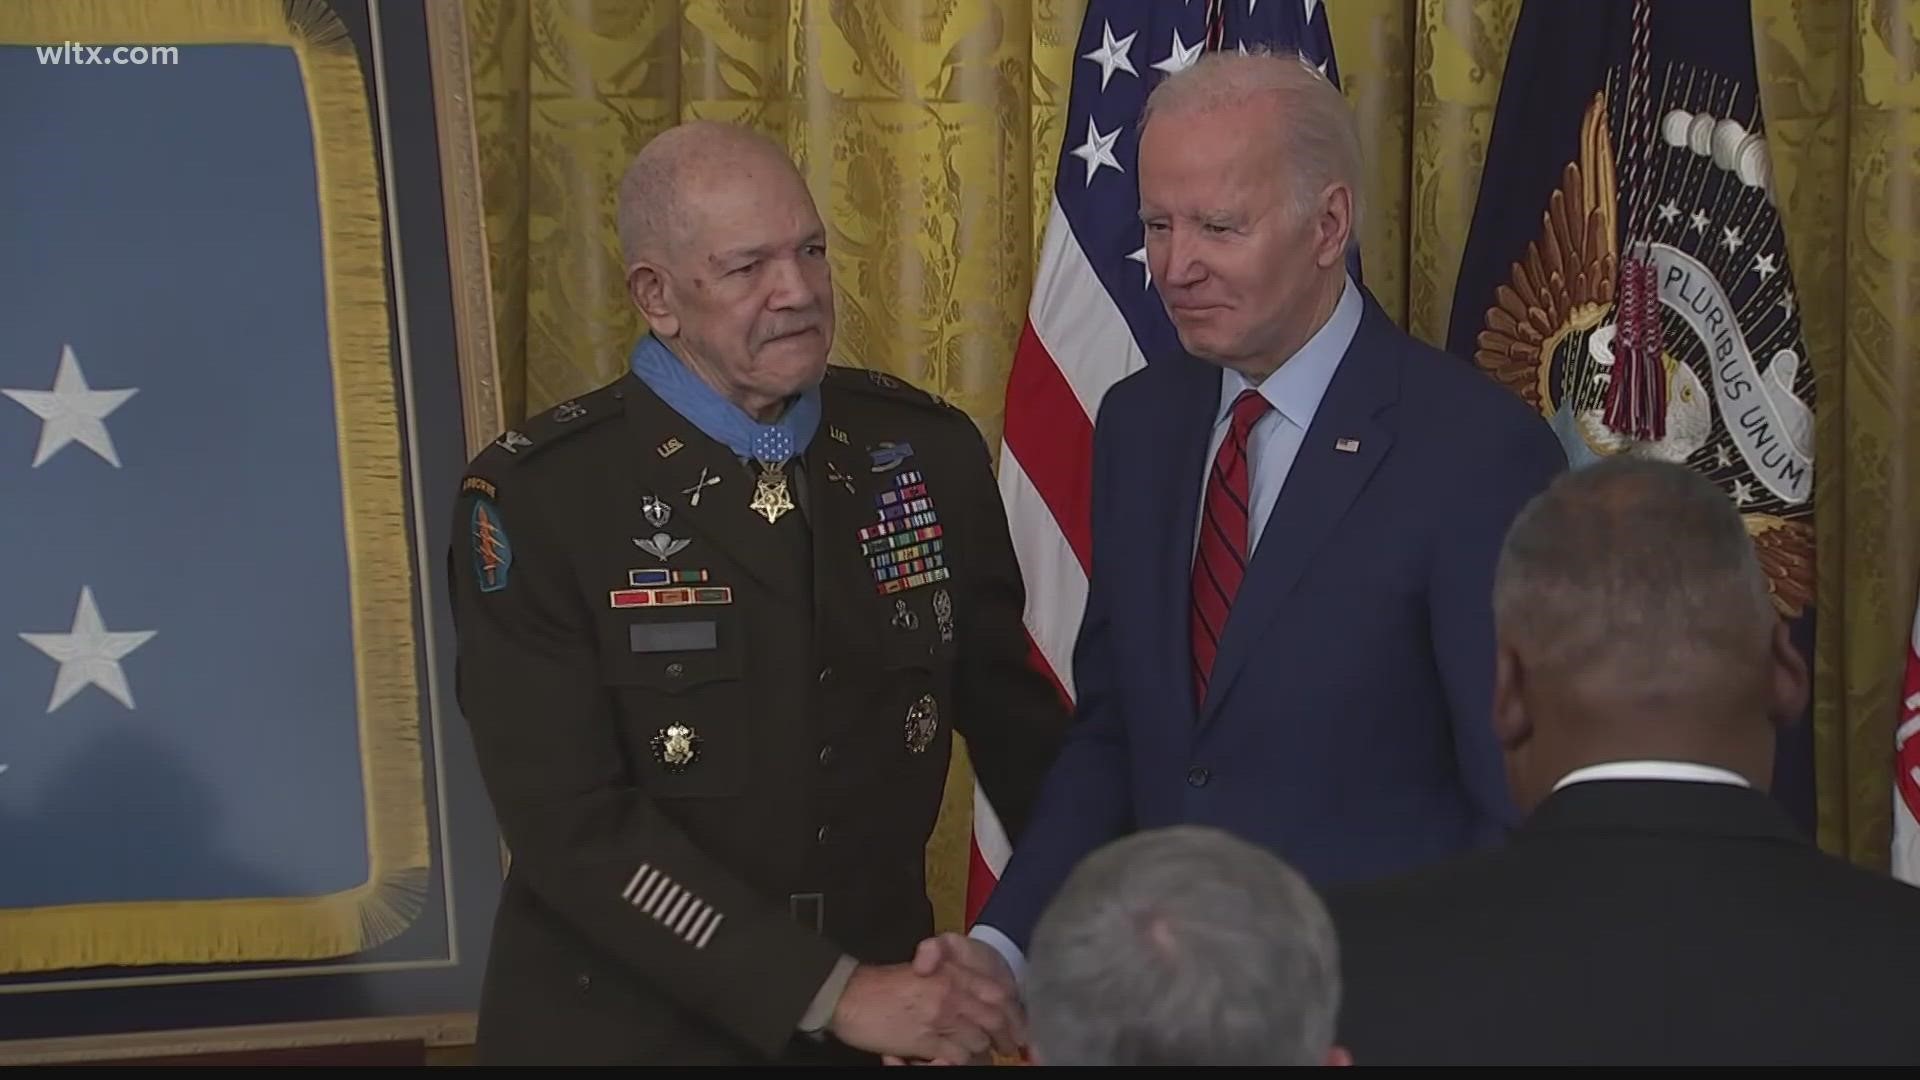 Retired Army Colonel Paris with the Green Berets received the Medal of Honor today.